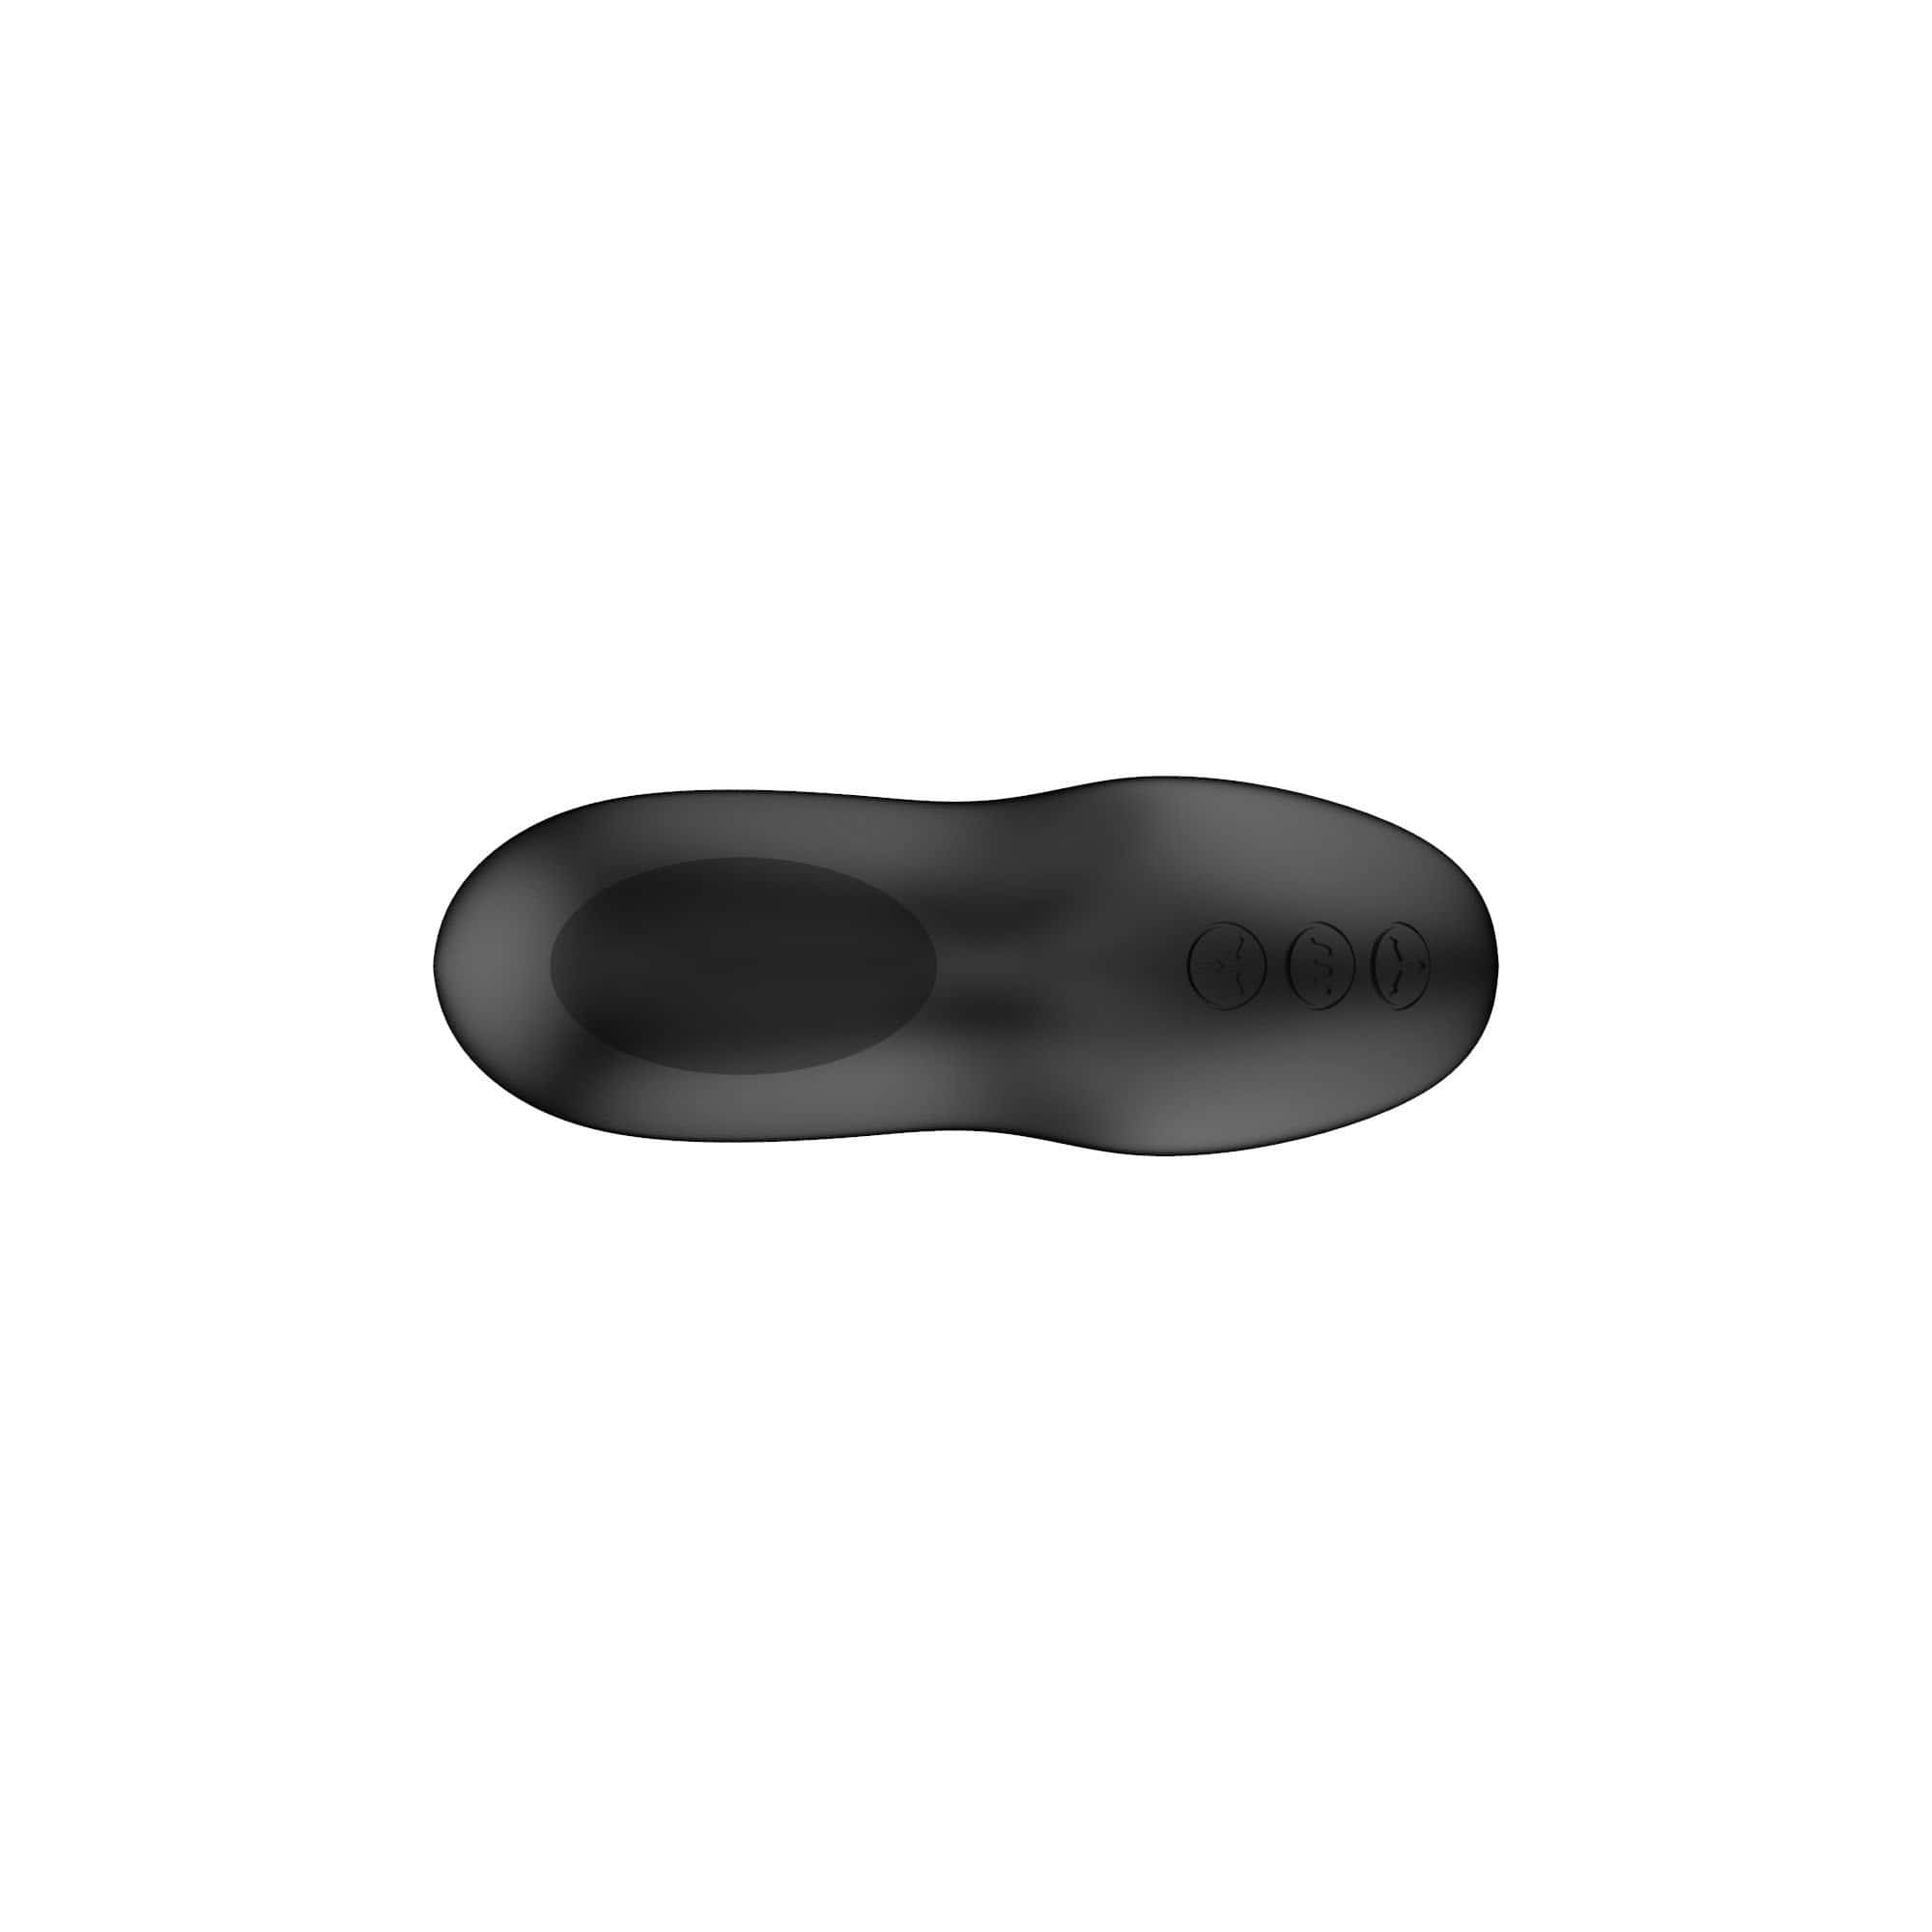 Nexus - Boost Rechargeable Inflatable Prostate Massager with Remote Control (Black) Prostate Massager (Vibration) Rechargeable 5060274221438 CherryAffairs